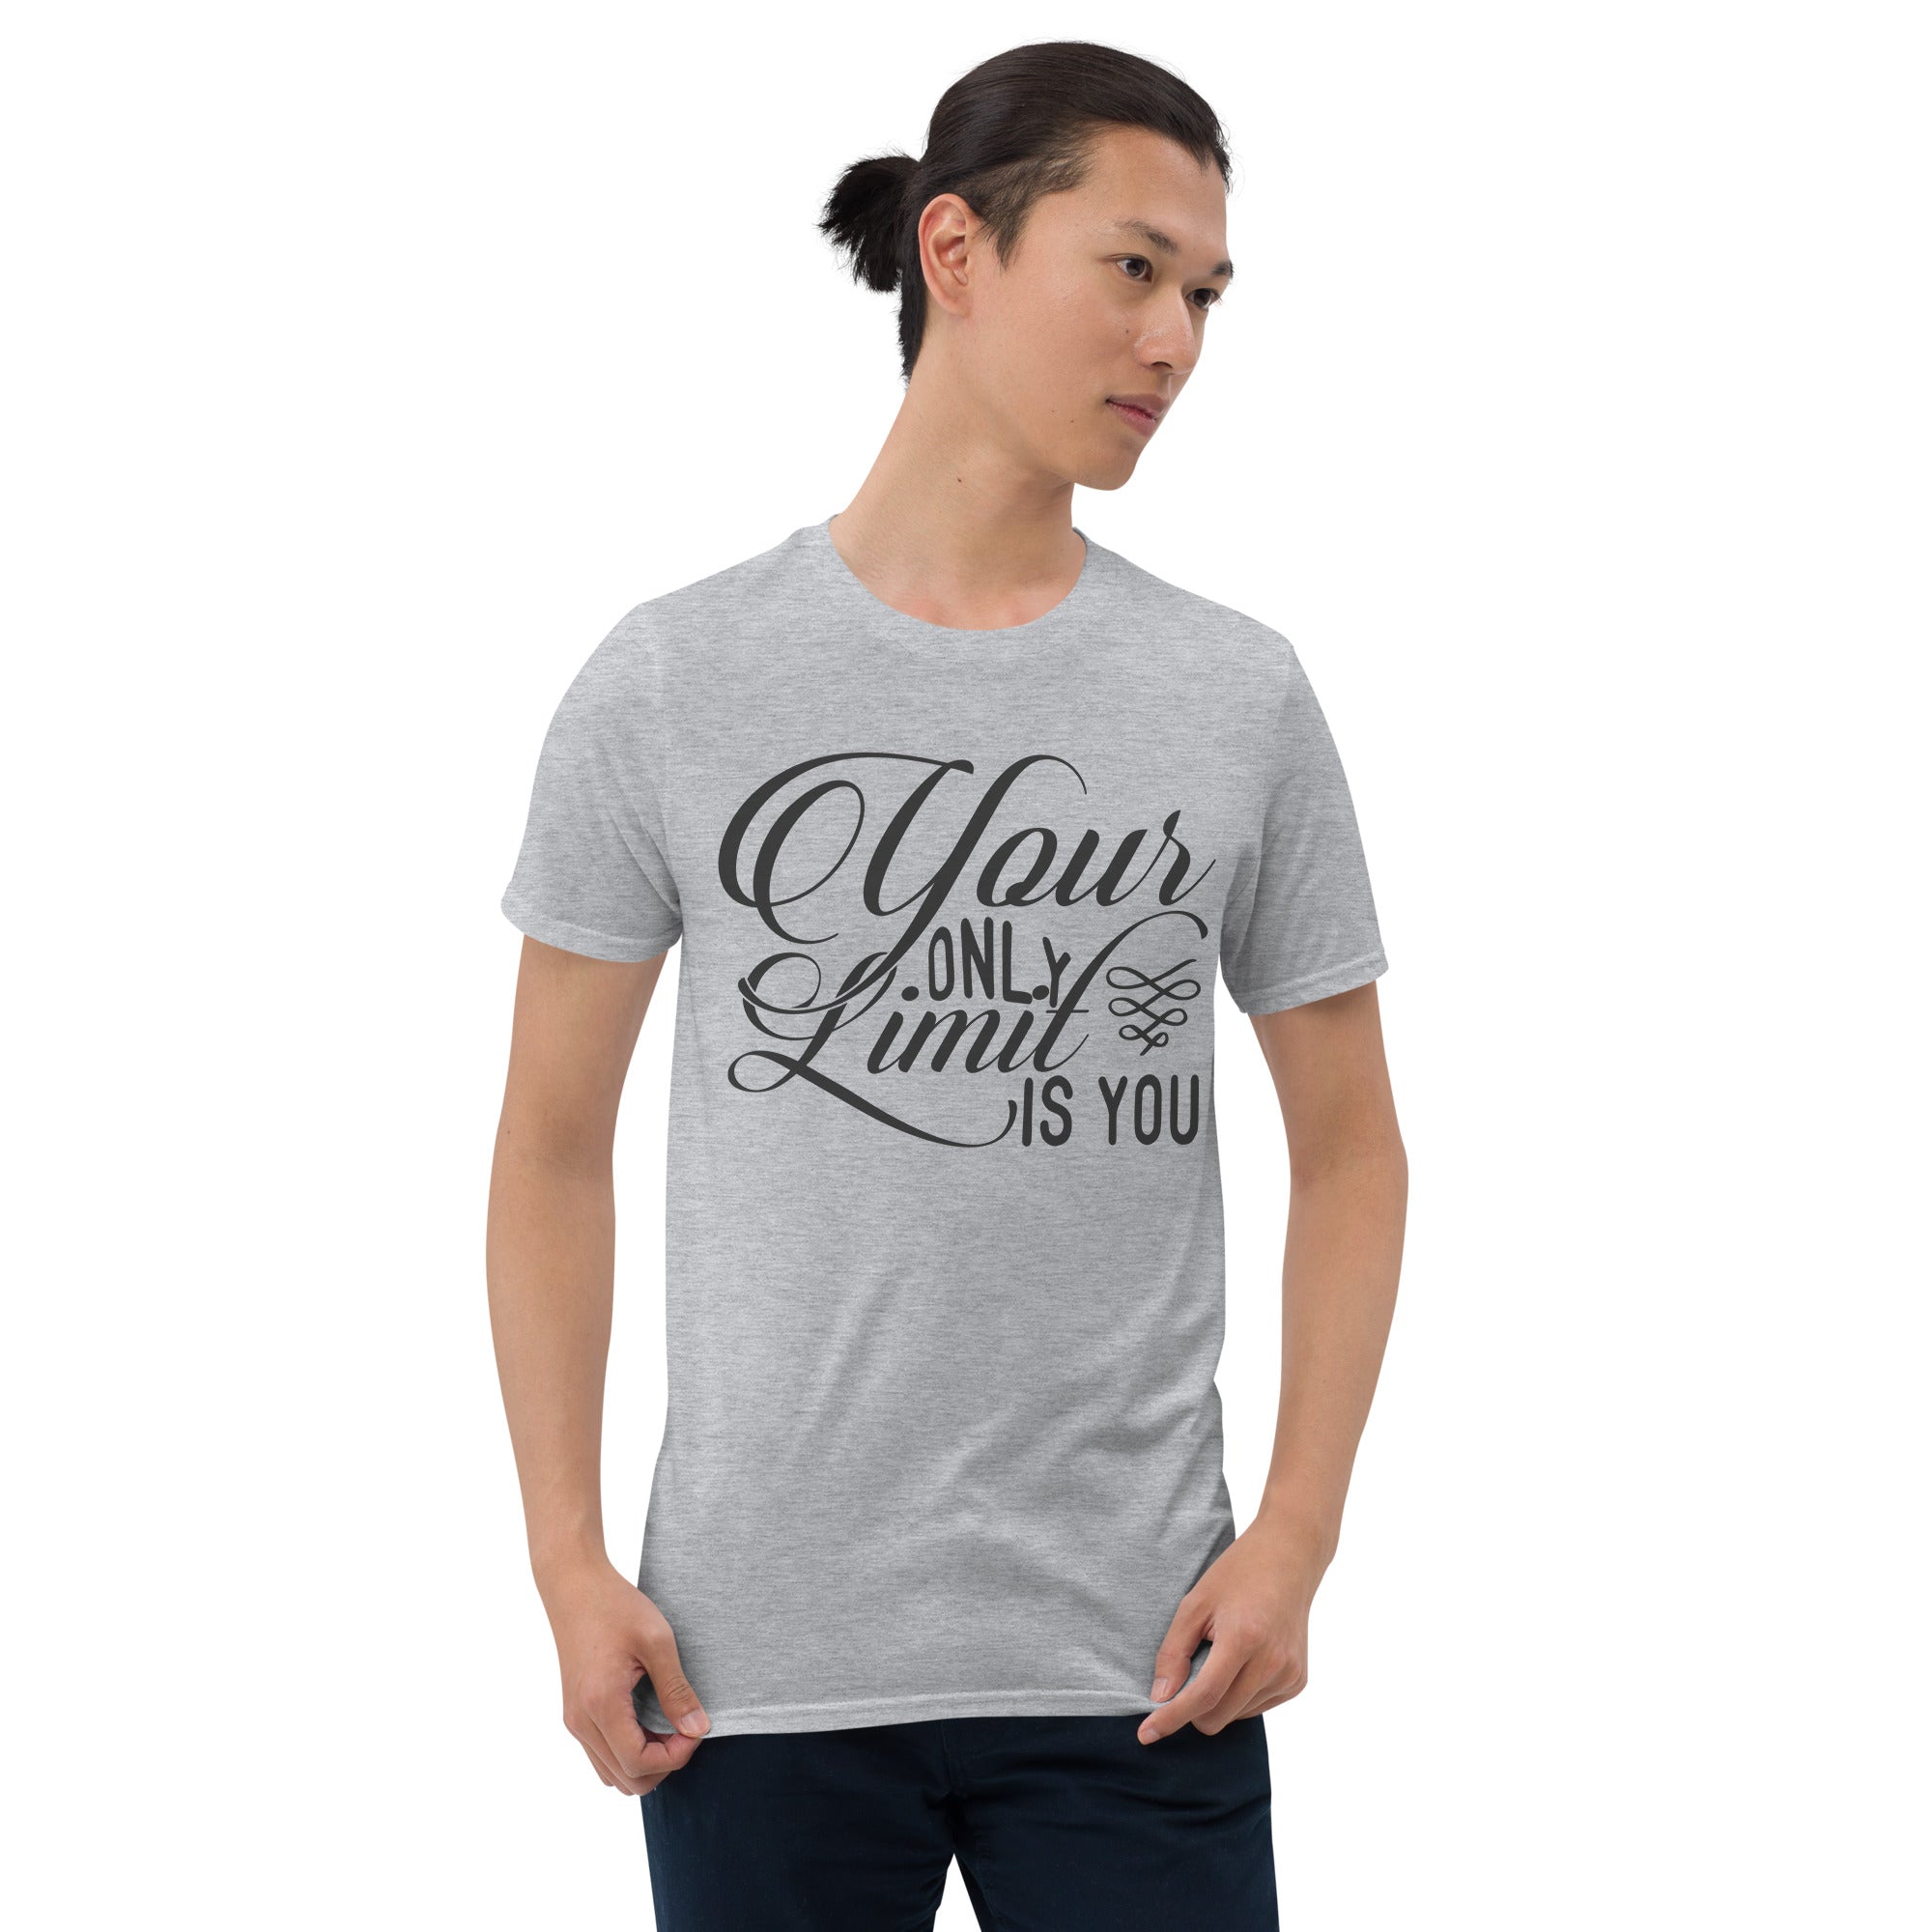 Your Only Limit Is You - Short-Sleeve Unisex T-Shirt